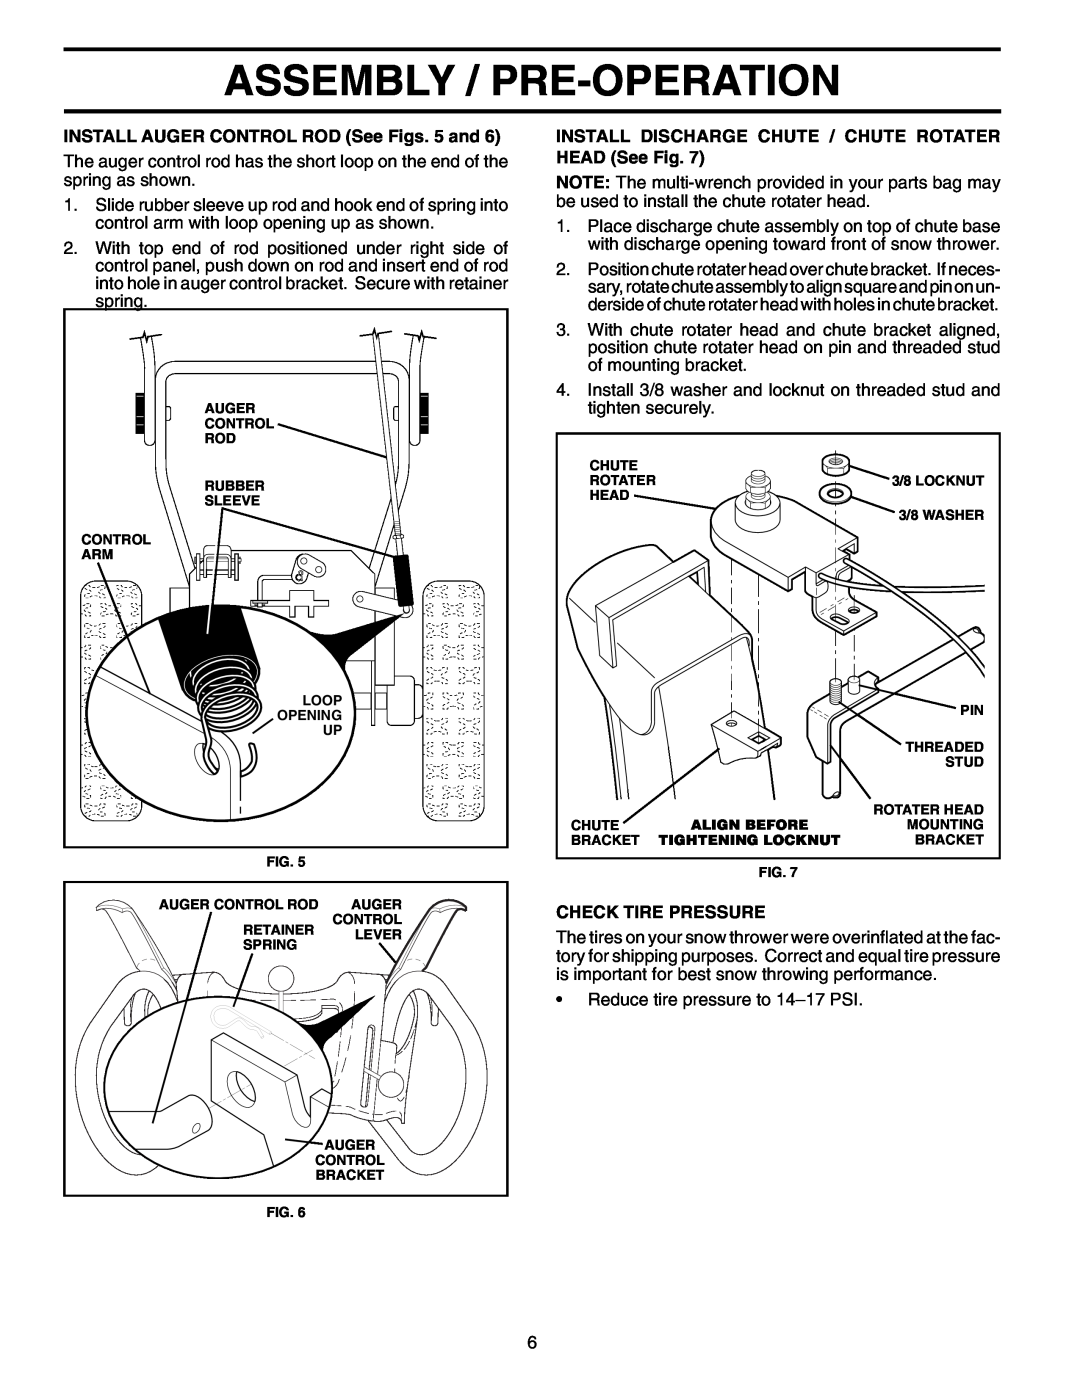 Poulan PR8527ES owner manual Assembly / Pre-Operation, INSTALL AUGER CONTROL ROD See Figs. 5 and, Check Tire Pressure 